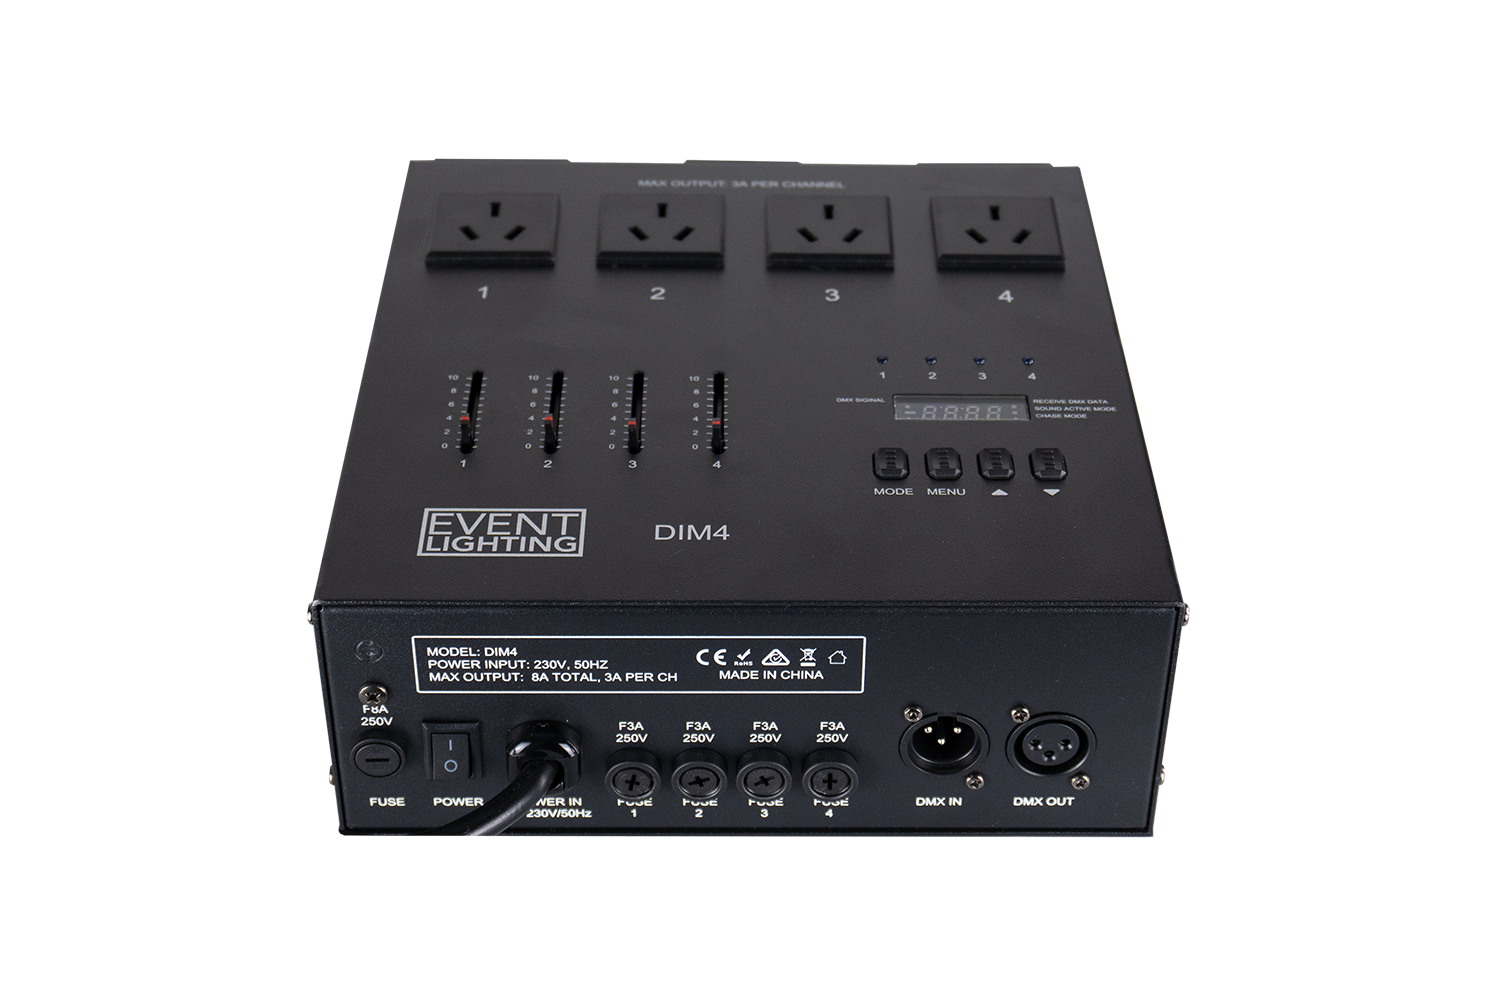 Event Lighting DIM4 4 channel DMX dimmer/switch, front